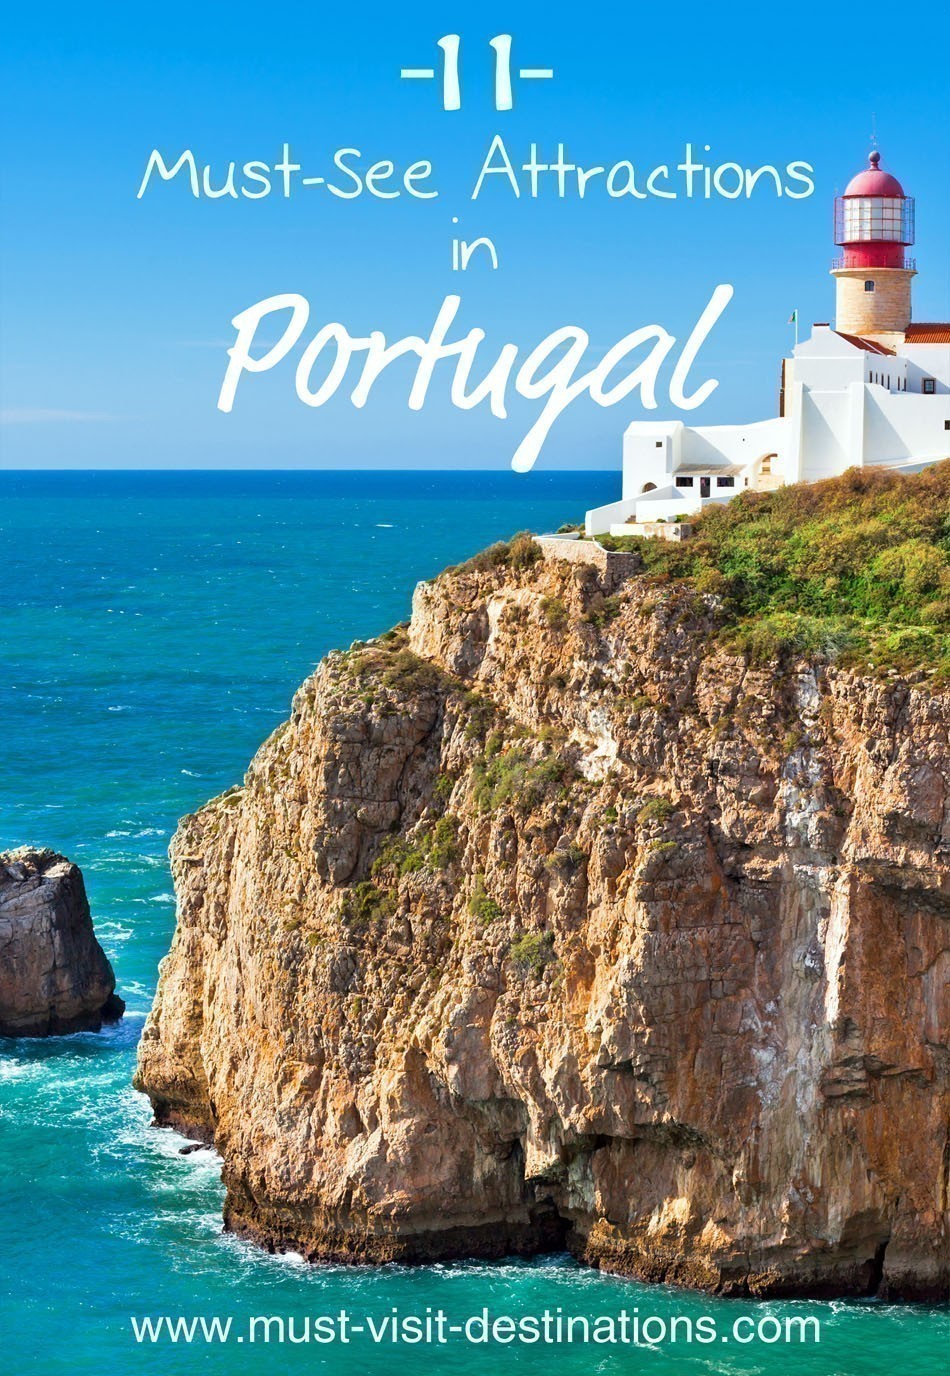 There’s plenty to do and see in Portugal, however, some destinations and sights just cannot be missed. Here are some of the top-rated tourist attractions and best destinations in Portugal.